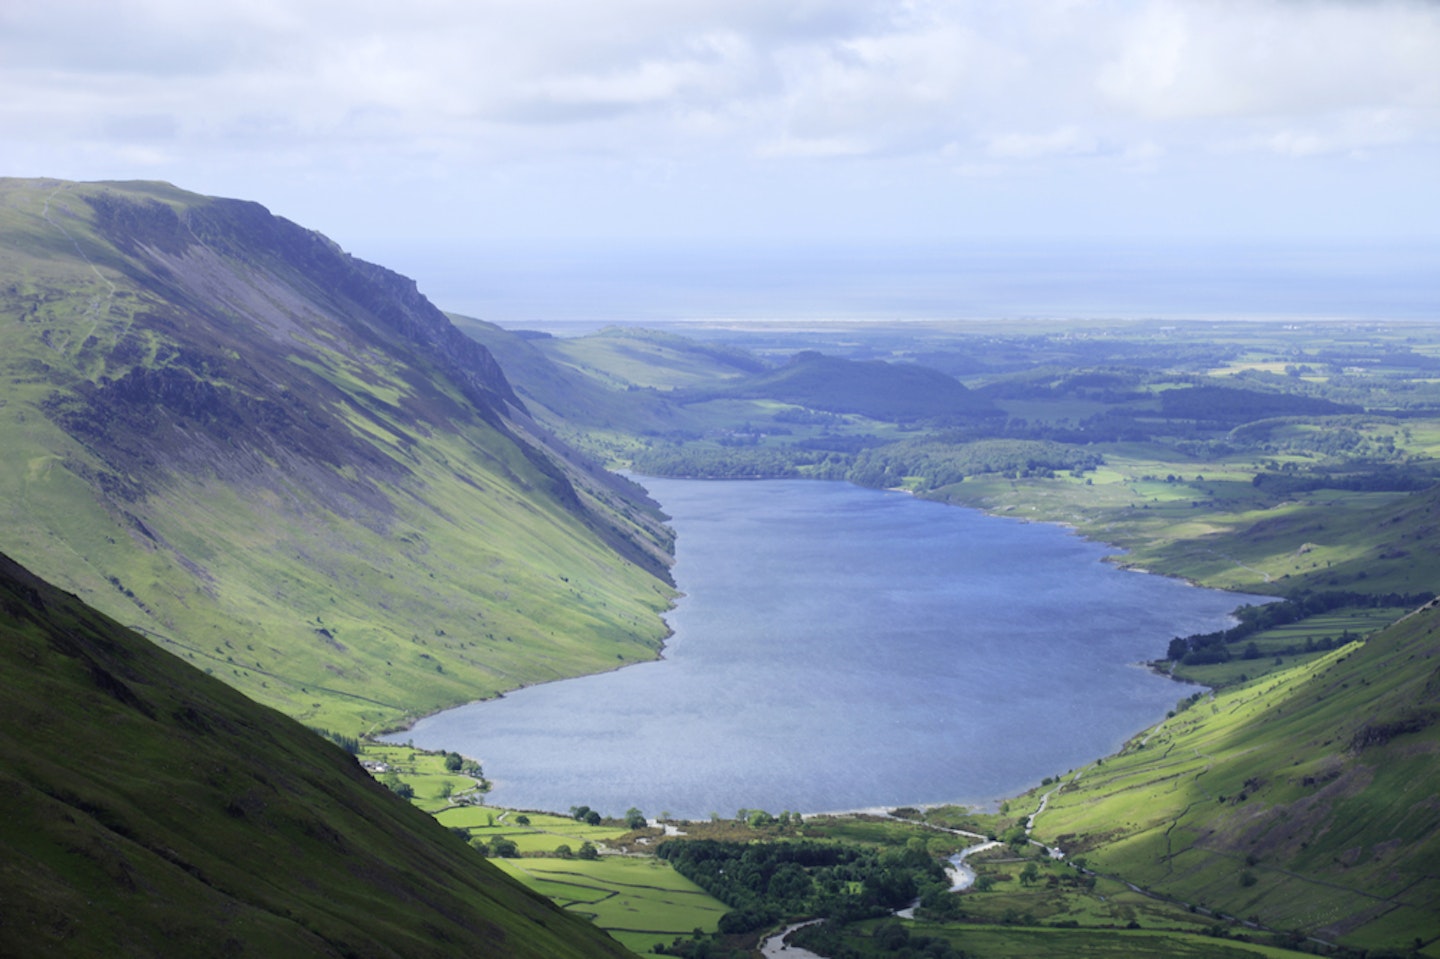 Wast Water from the sloes of Scafell Pike. Photo: Tom Bailey © Trail Magazine 